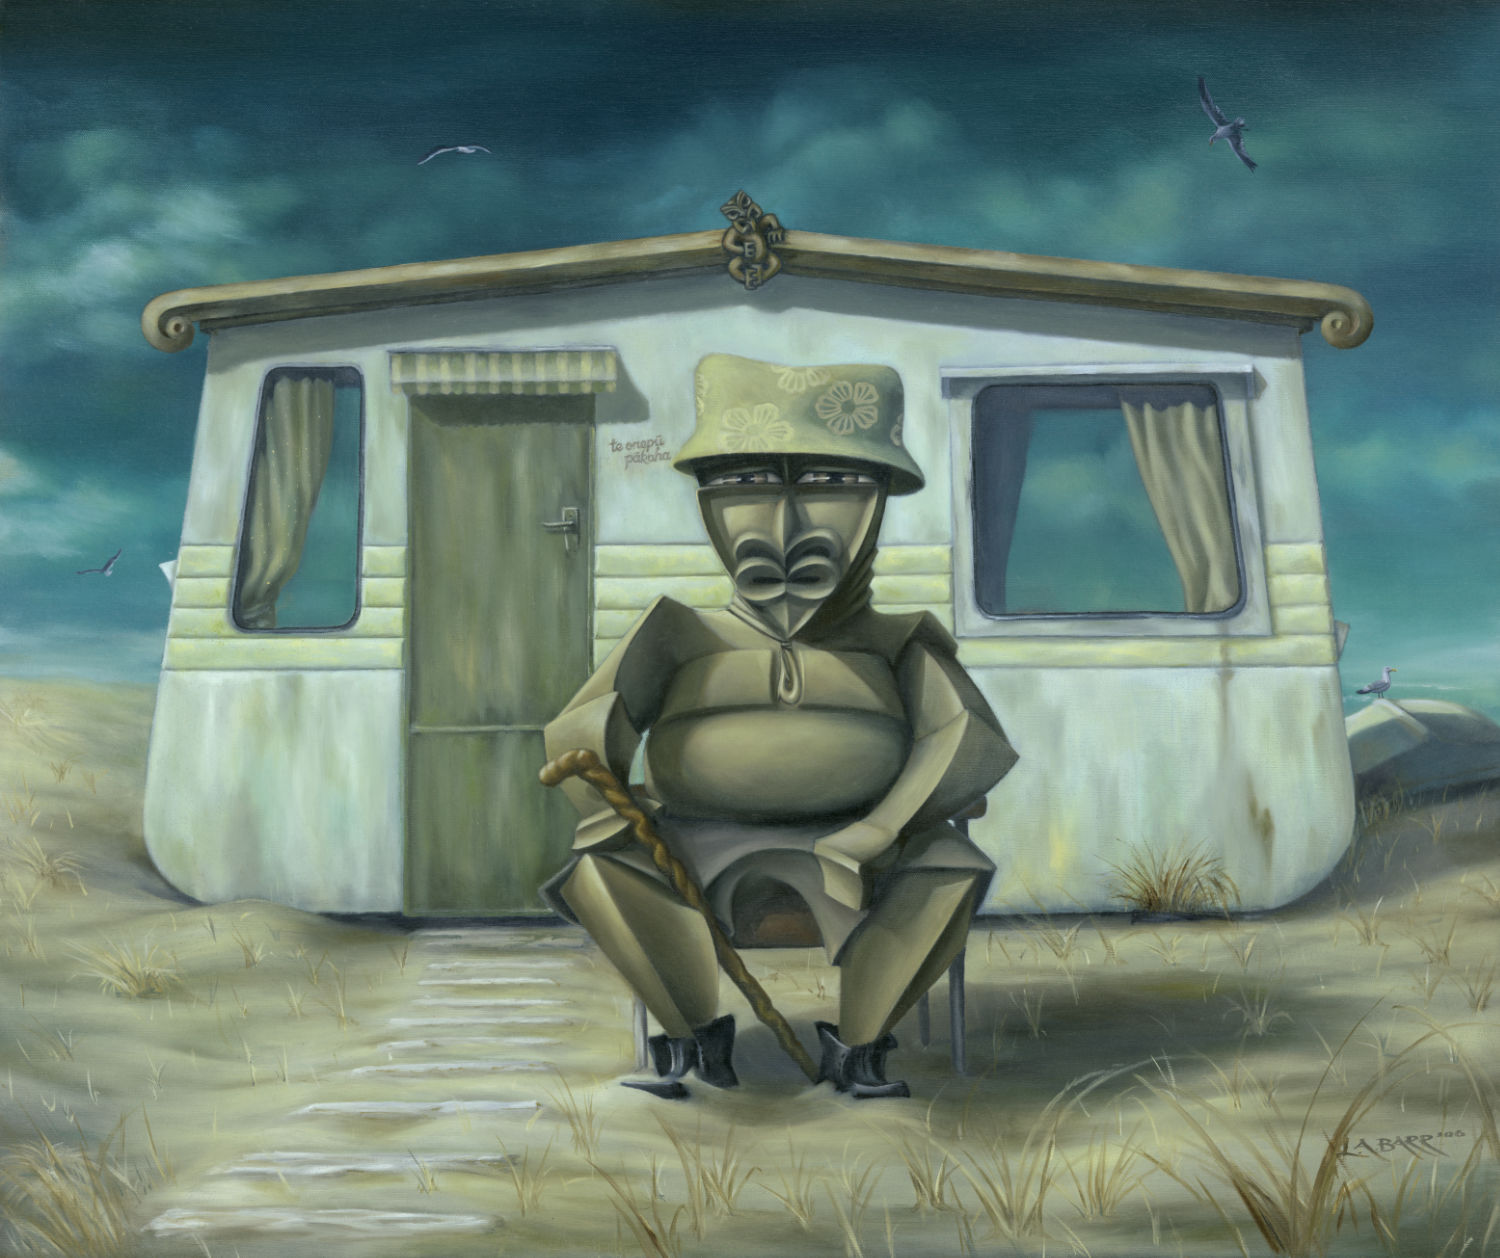 Tiki figure sits in front of beach caravan contemplating his life painting from Liam Barr